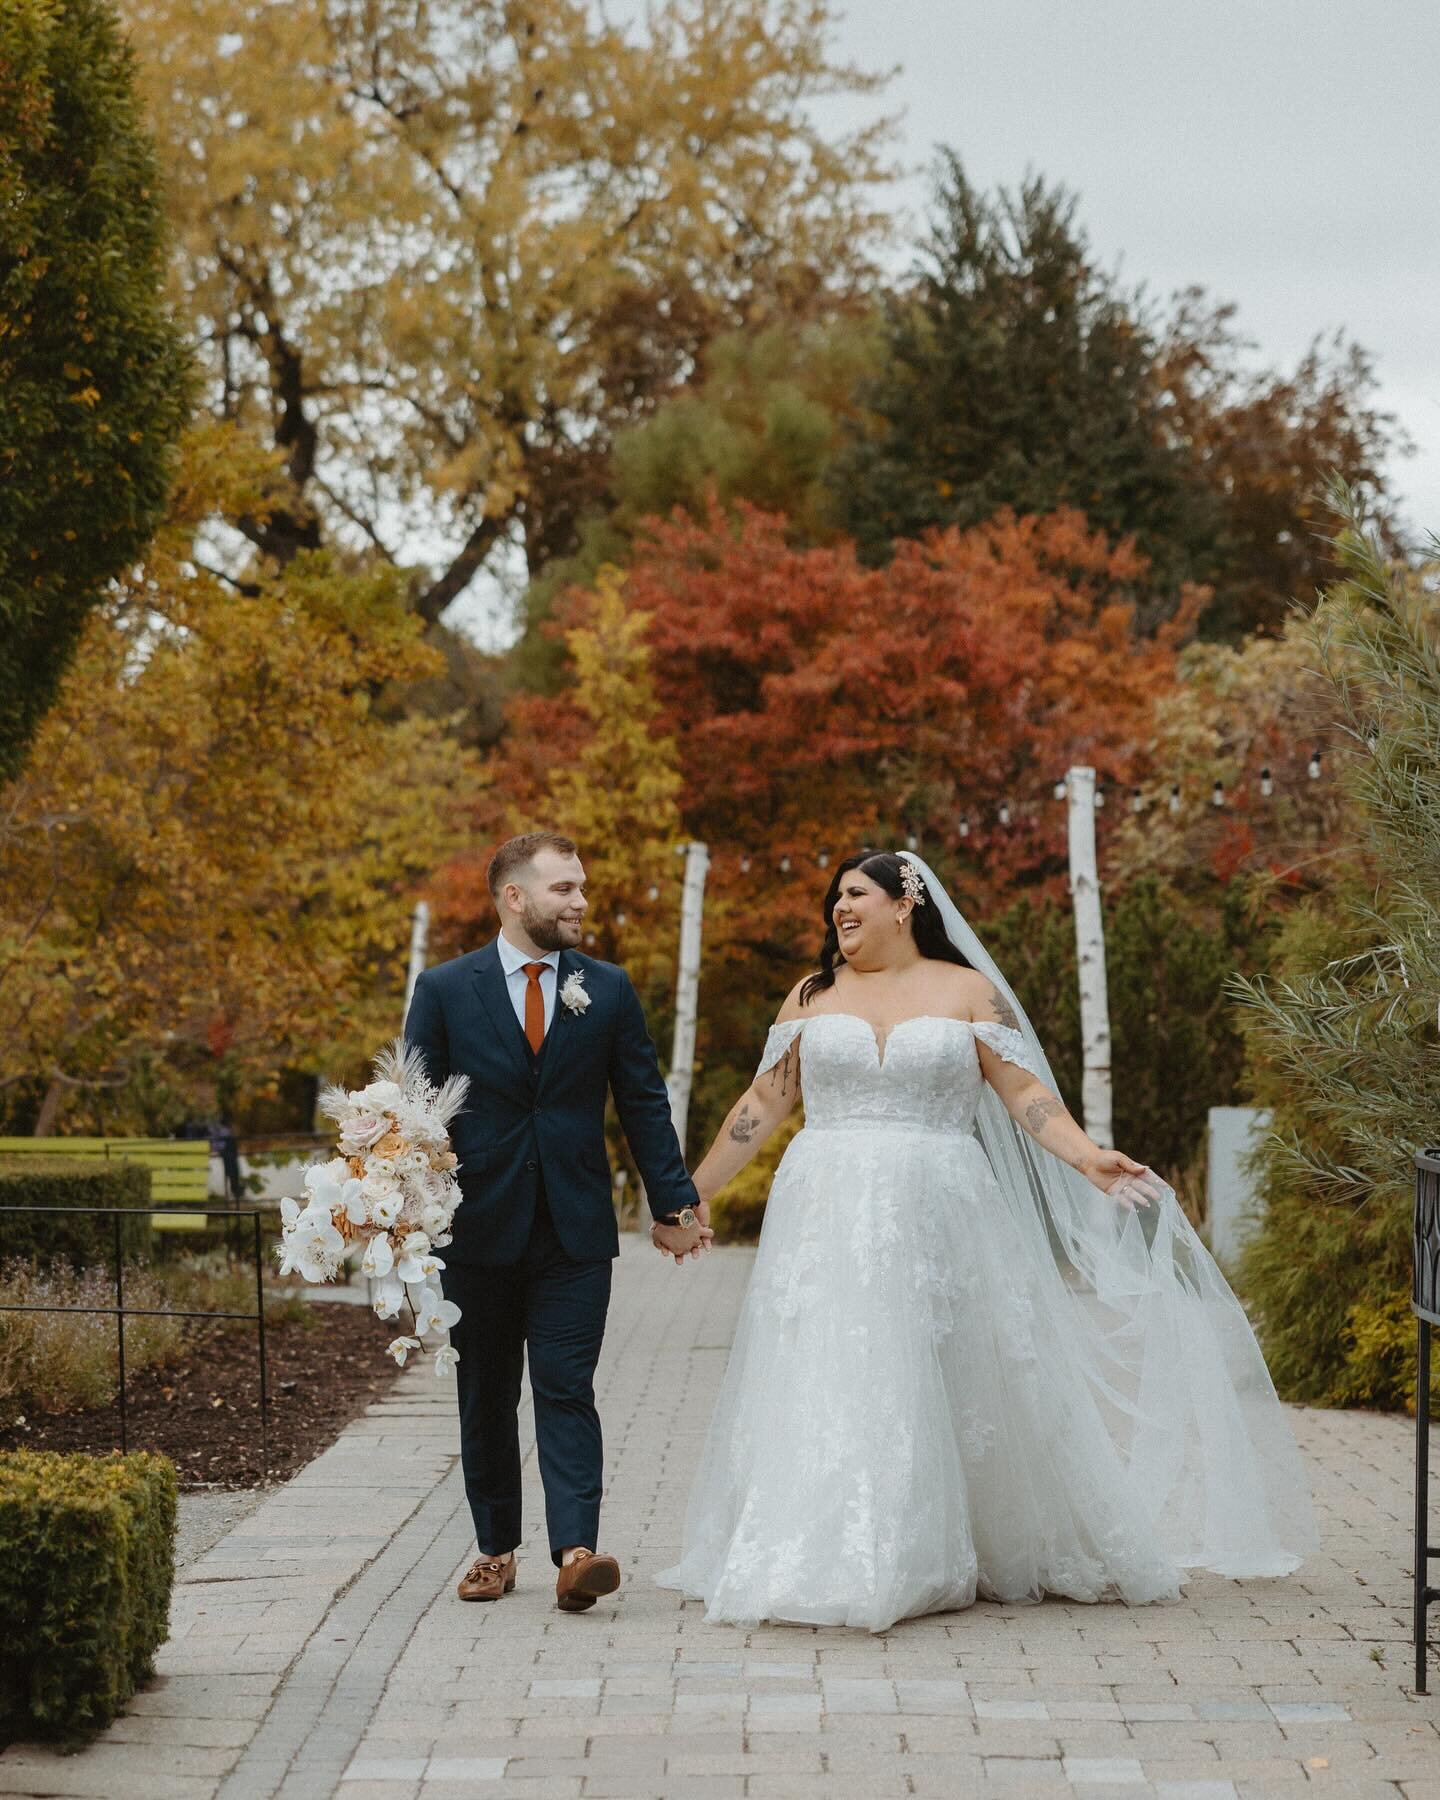 // Here are some wonderful highlights from Brittany + Andre&rsquo;s truly special day, where love, laughter, and cherished memories overflowed in each and every moment. 

I can&rsquo;t put into words how much I loved our journey together. Every momen